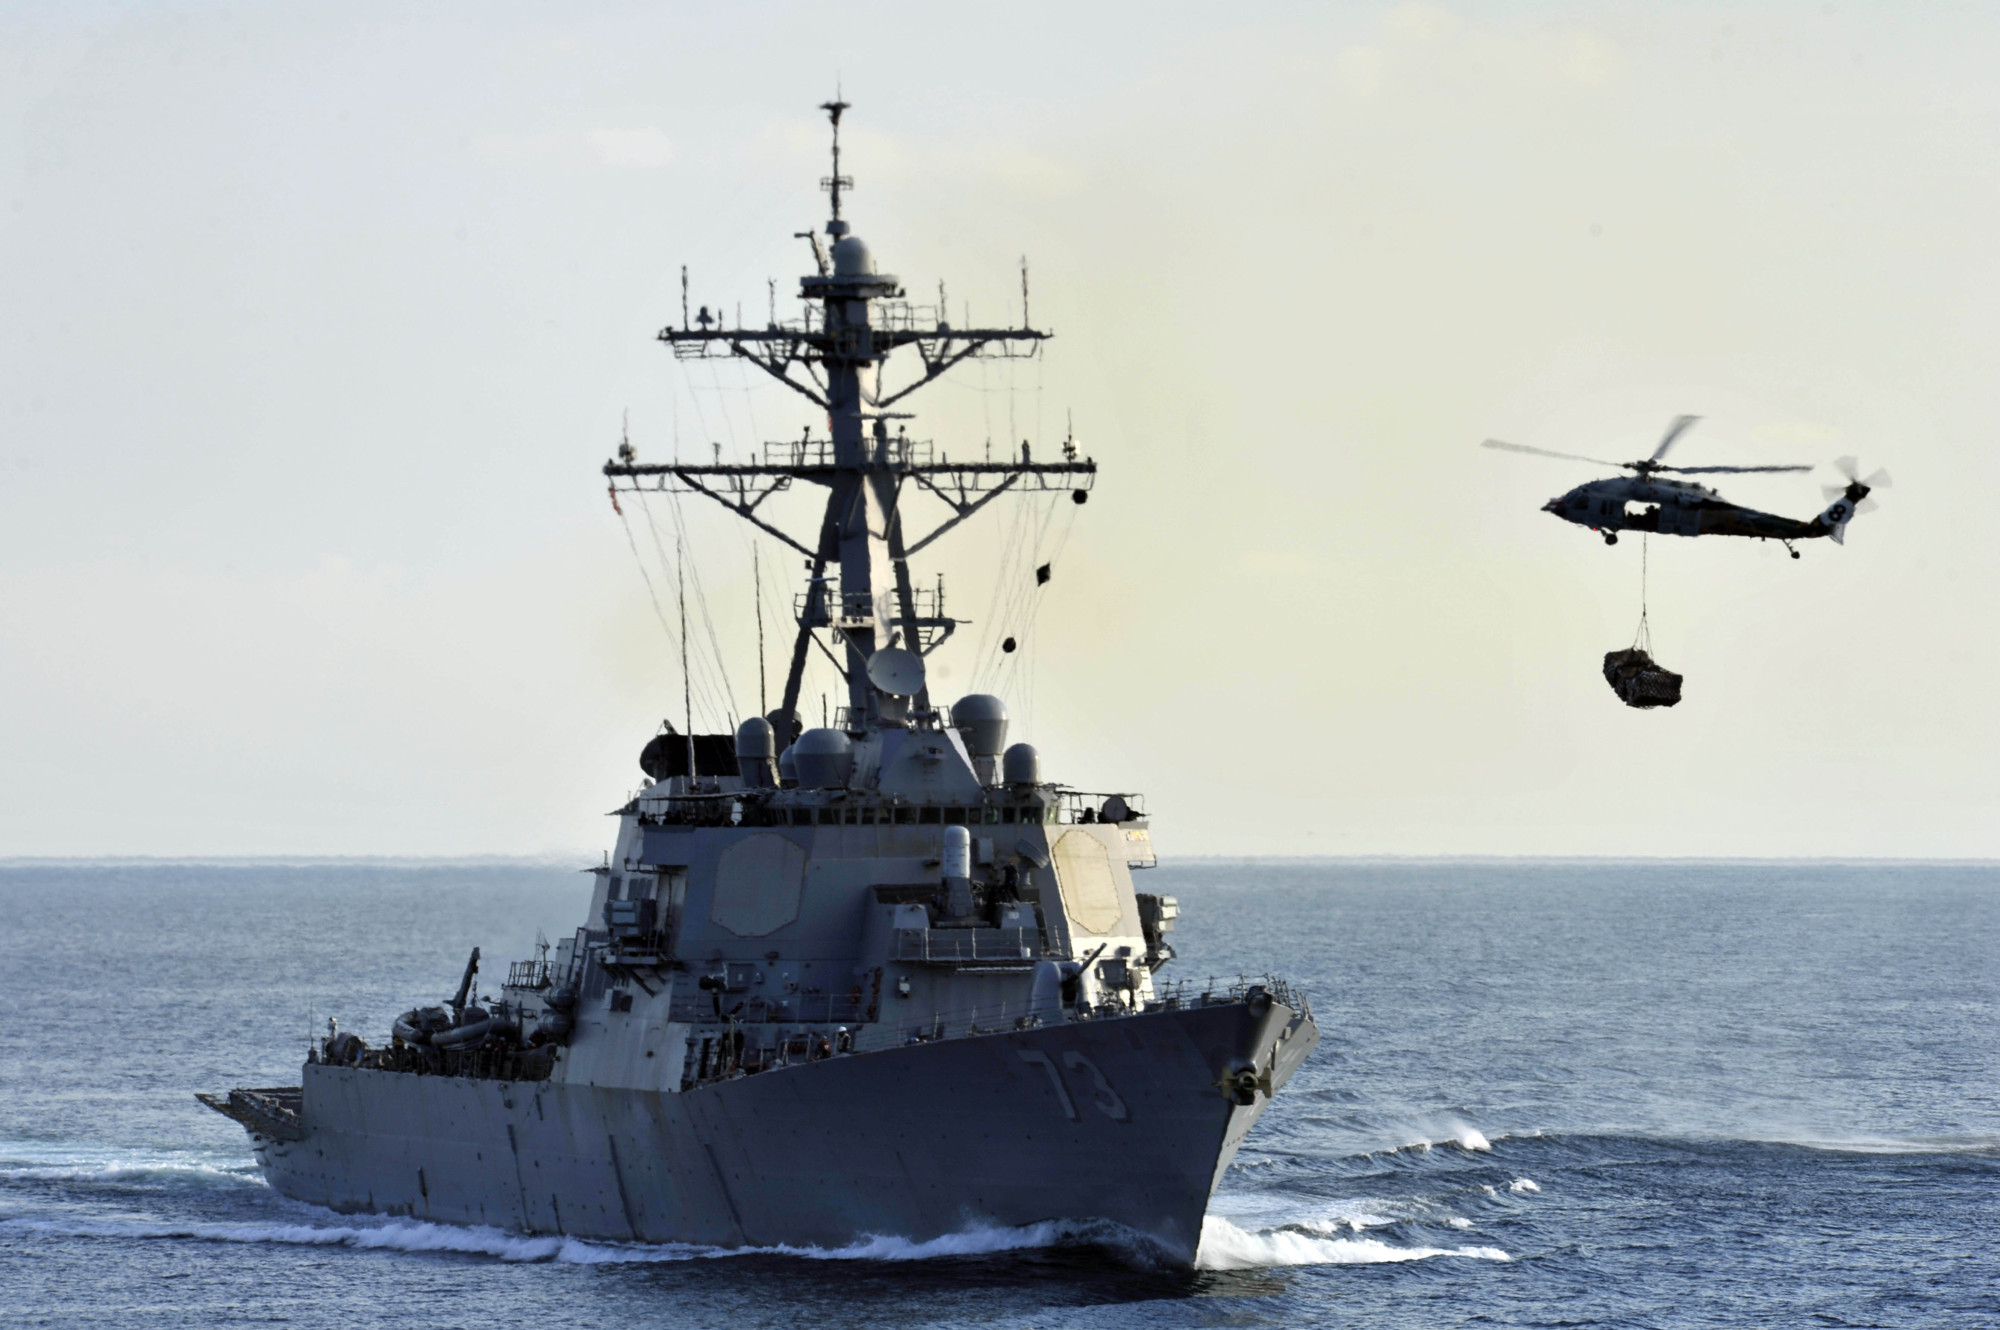 An SH-60B Sea Hawk helicopter approaches the guided-missile destroyer USS Decatur during a vertical replenishment in December 2012. | U.S. NAVY